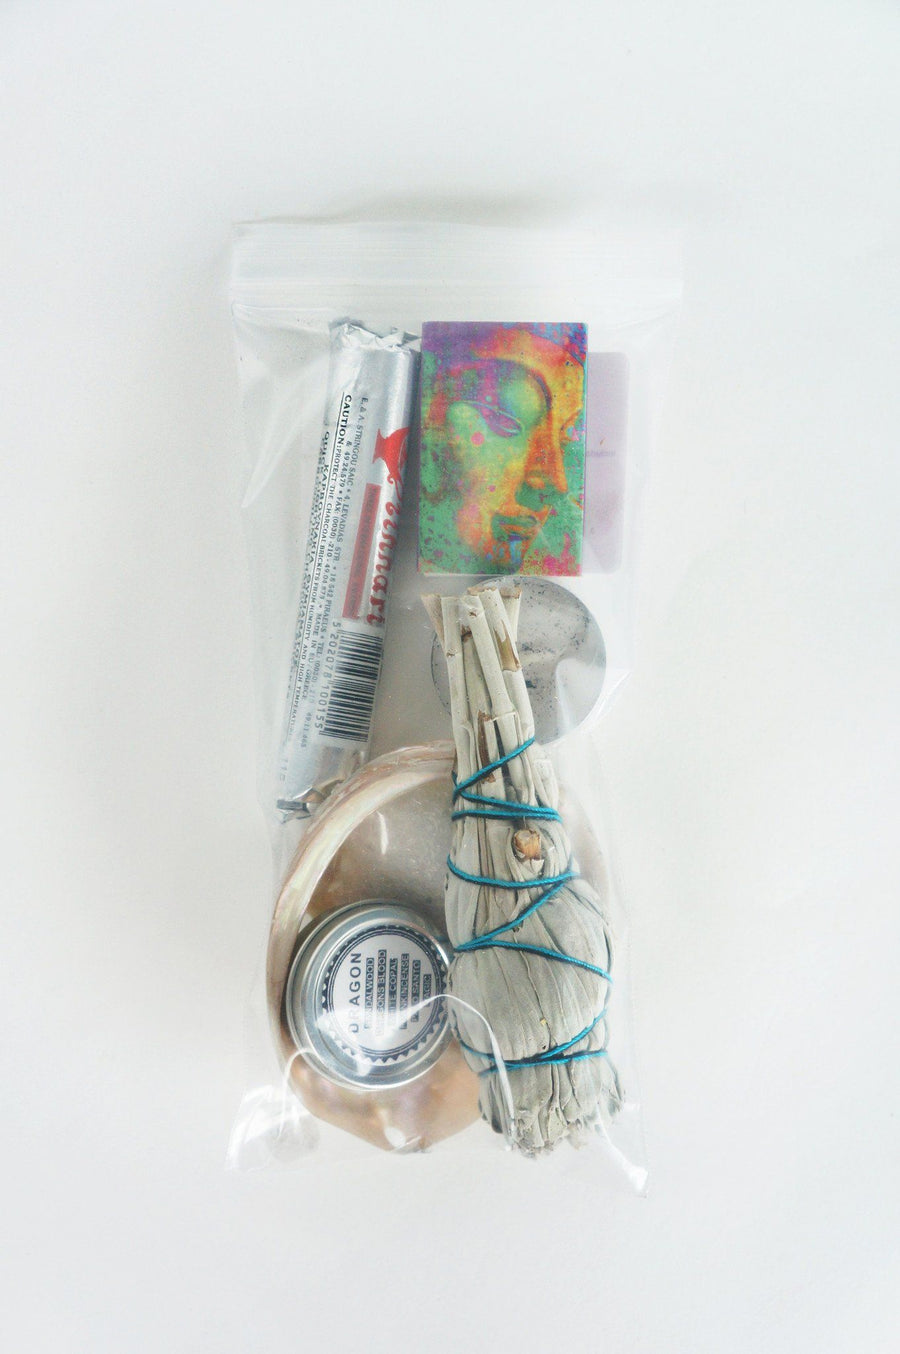 Cleanse & Purify Ritual Cleansing Kit Smudge Kits House of Intuition 